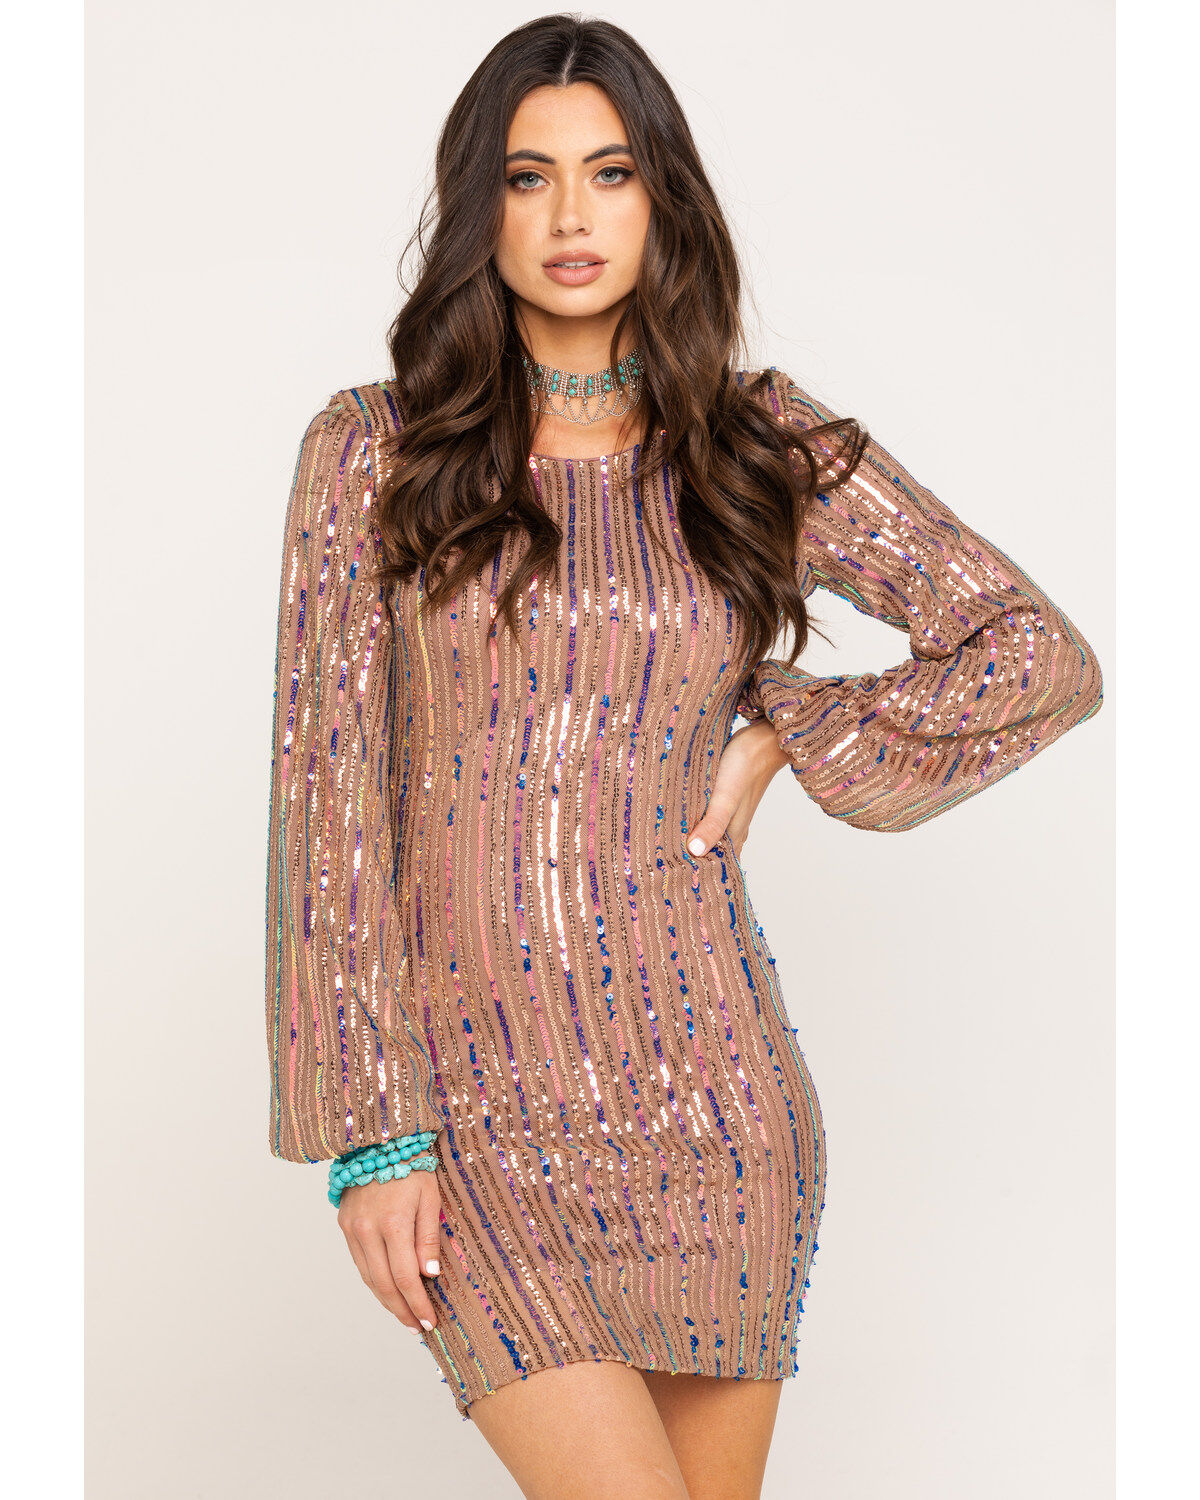 rose colored sequin dress